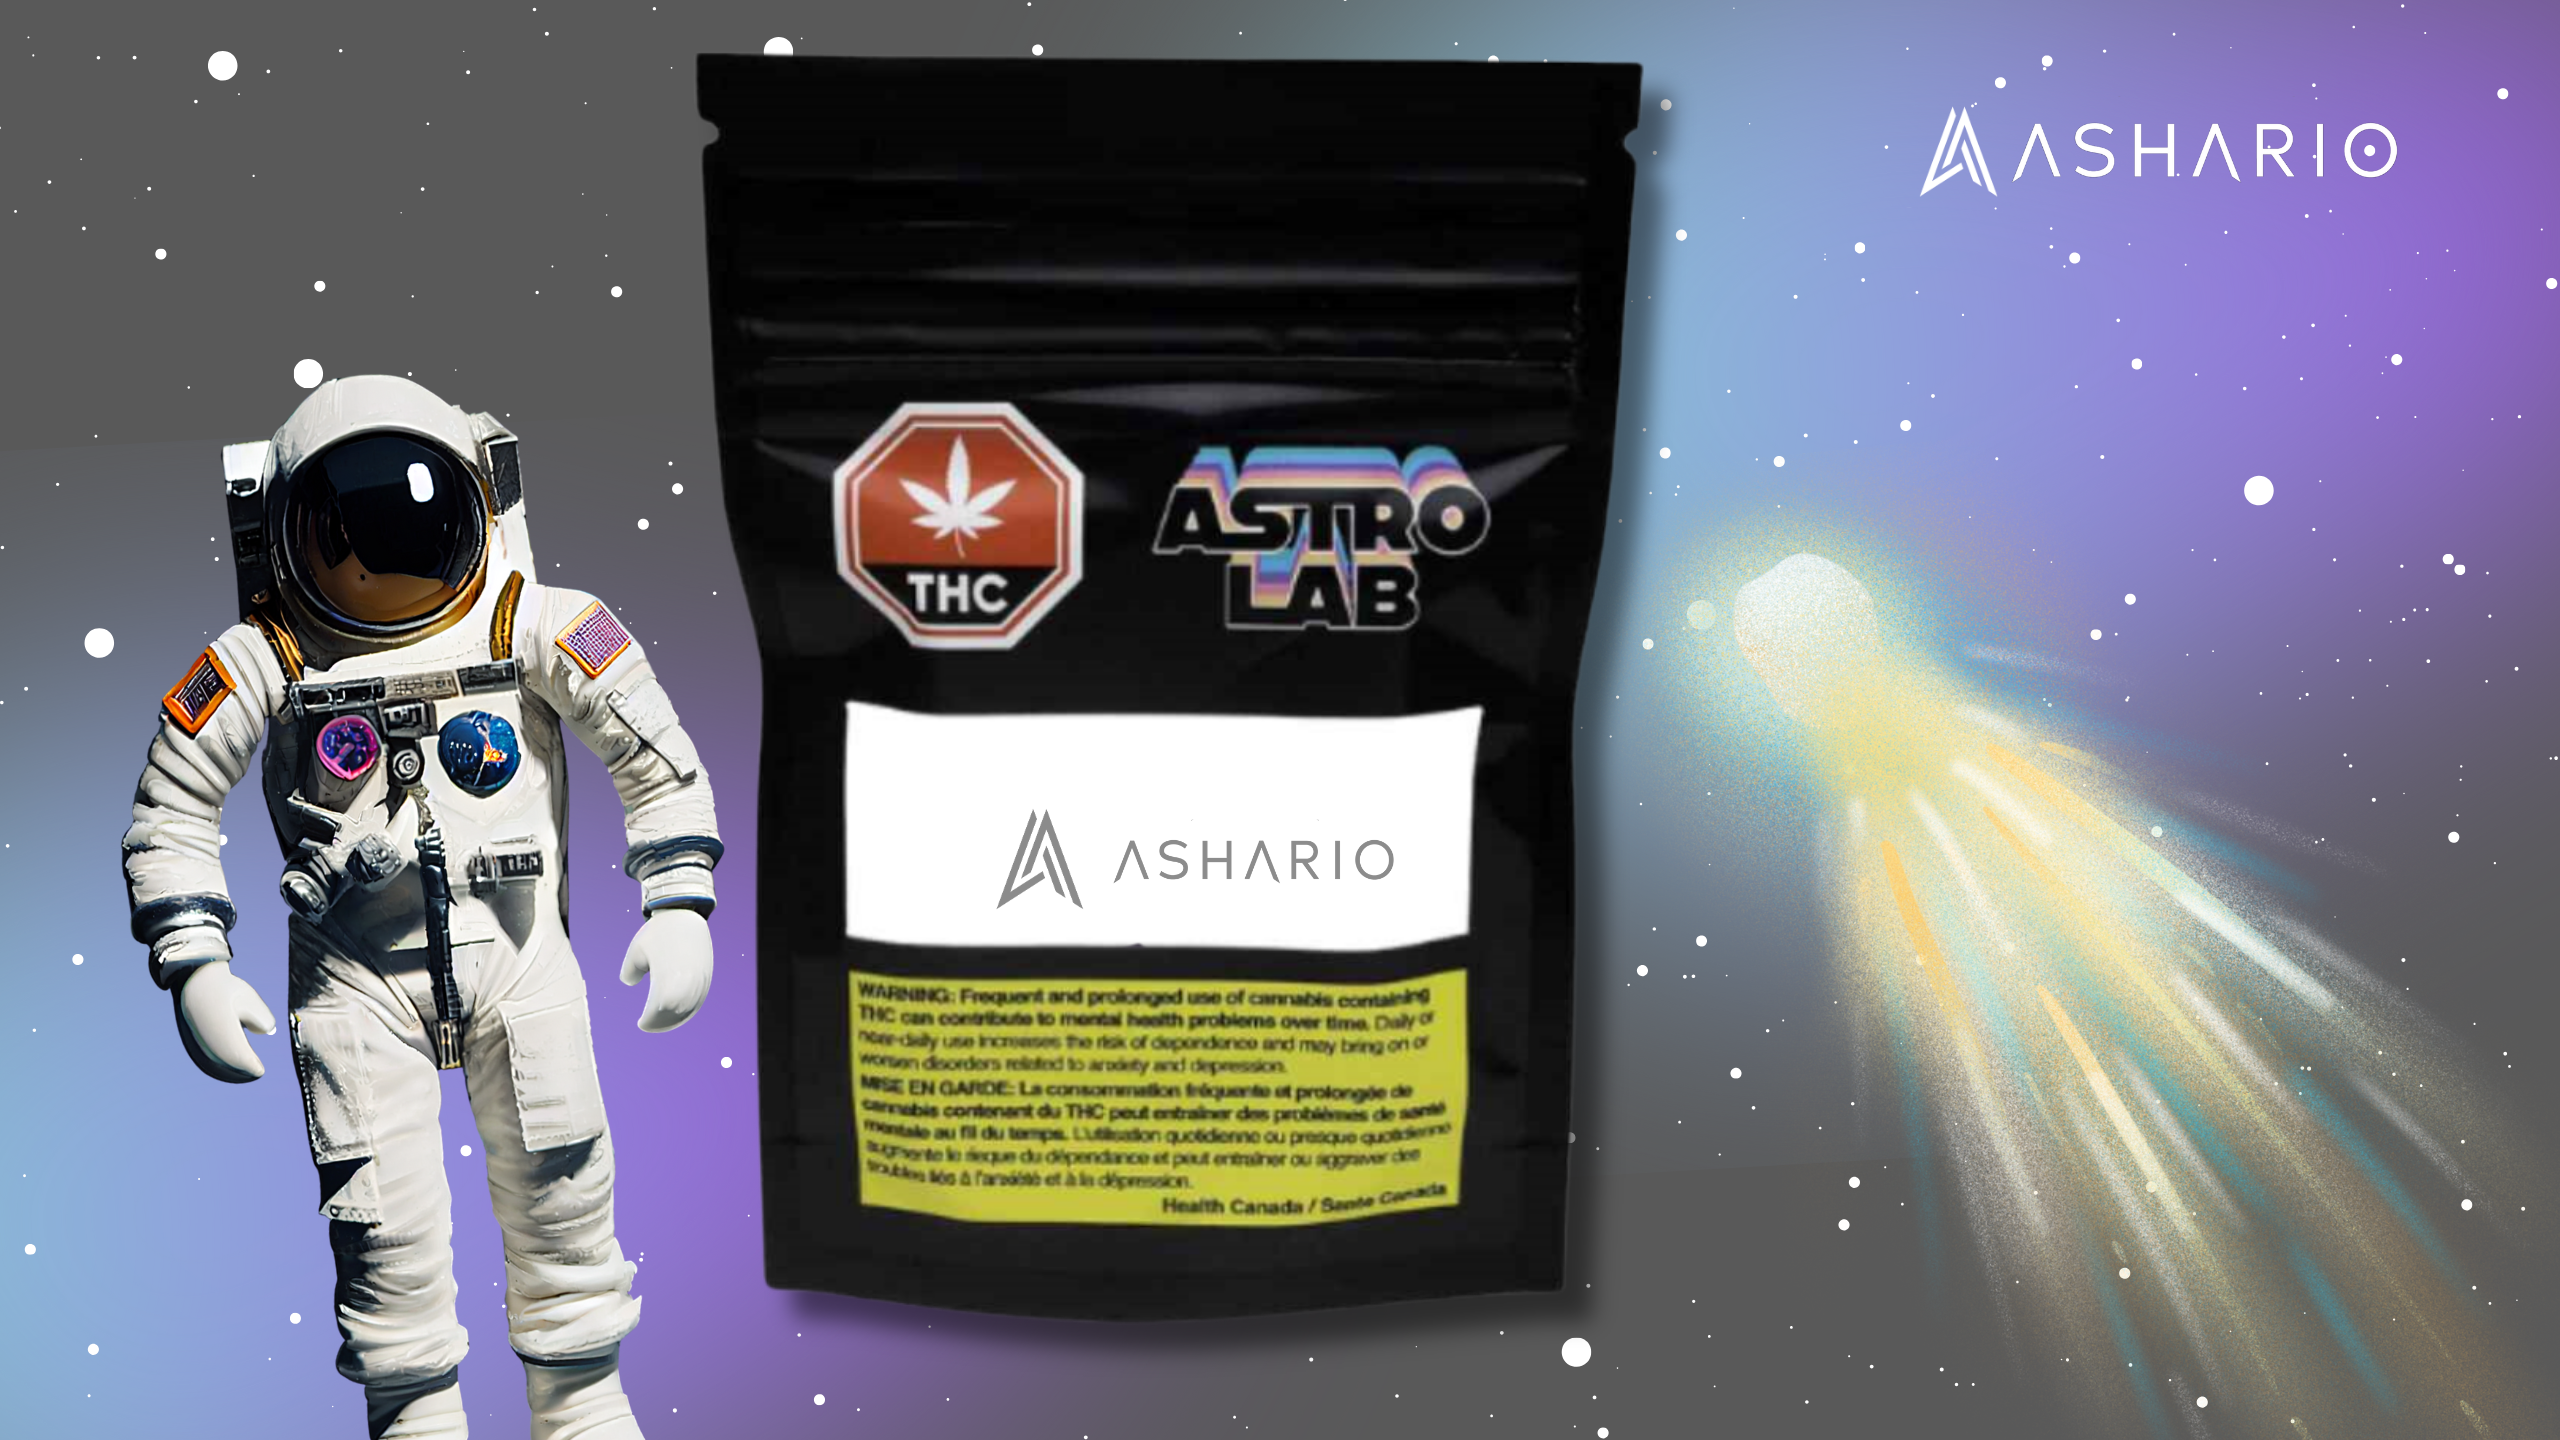 Experience cannabis excellence with Ashario's Astrolab concentrates and extracts. Crafted using solventless extraction for purity and potency, they offer a flavor-rich experience. Explore innovation and quality with Ashario Cannabis.